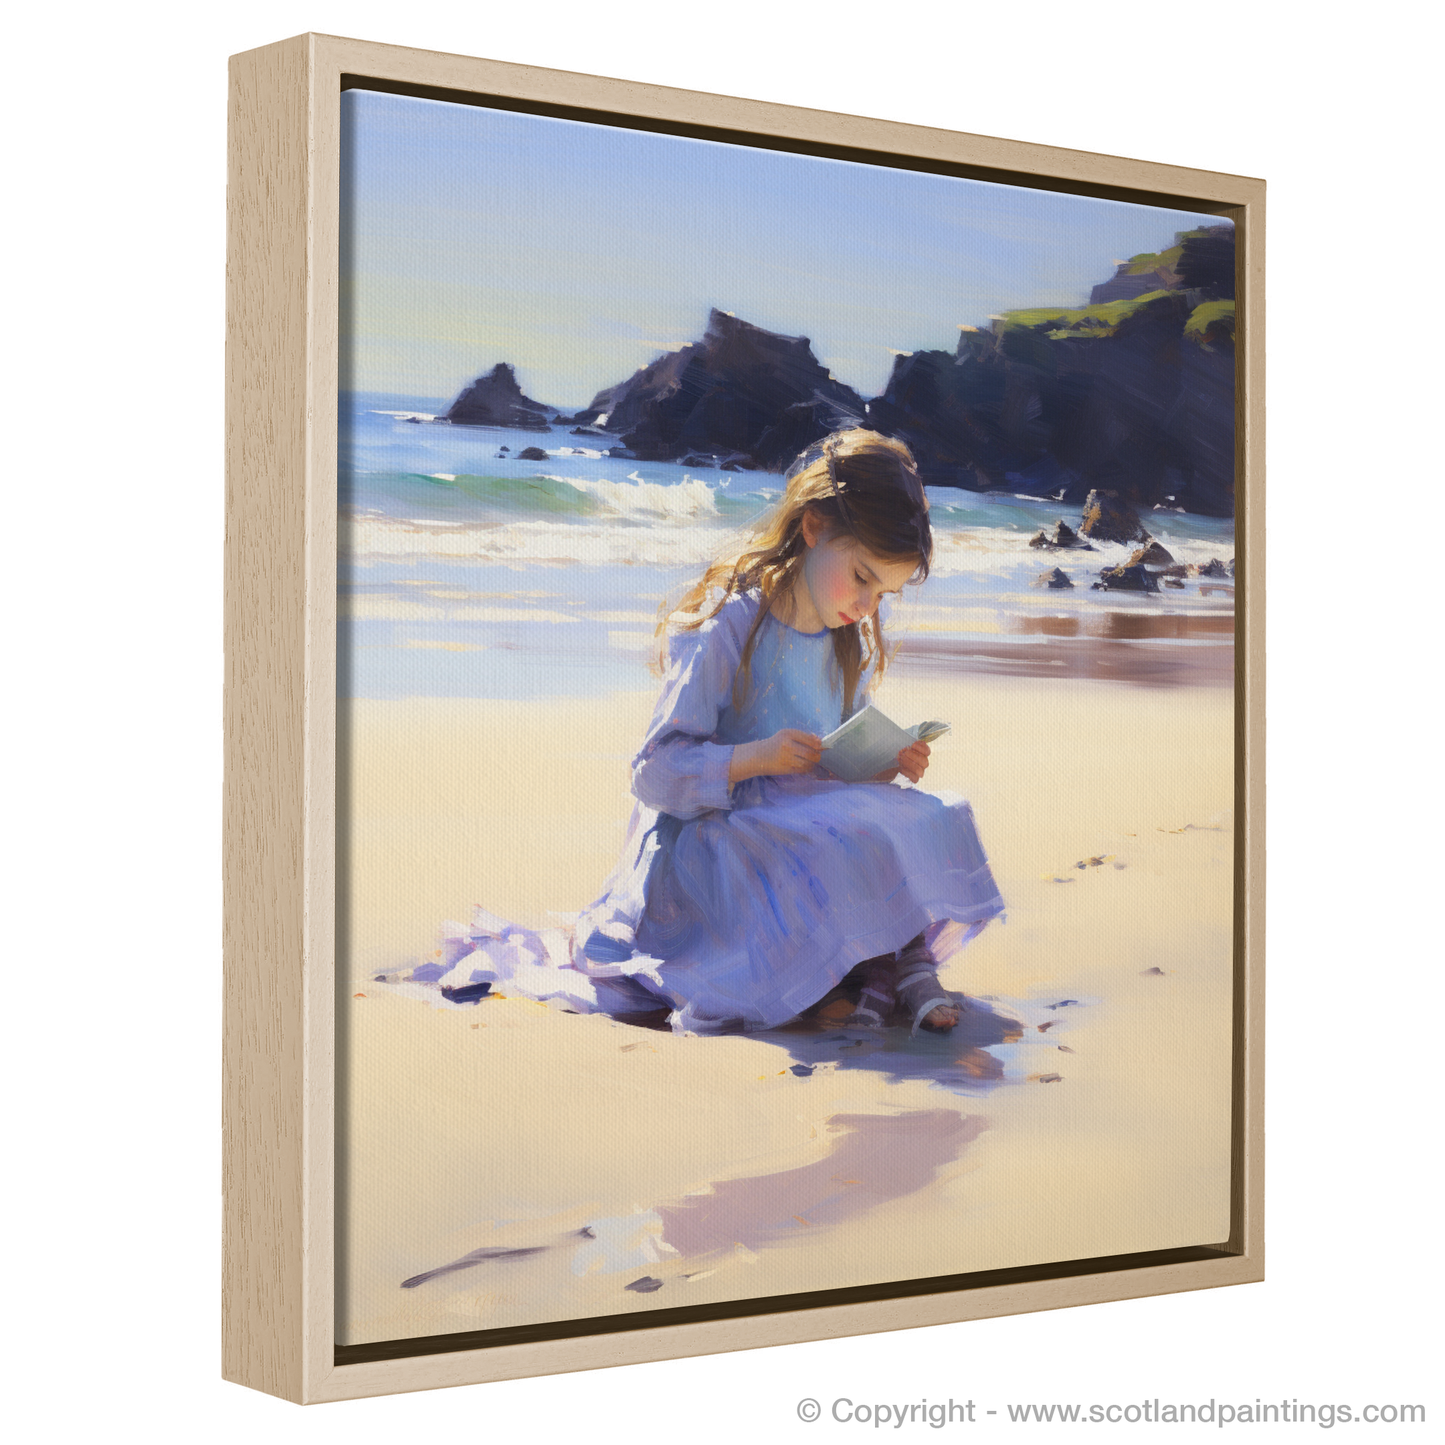 Painting and Art Print of A girl writing her name in the sand at Eyemouth Beach entitled "Ephemeral Impressions at Eyemouth Beach".